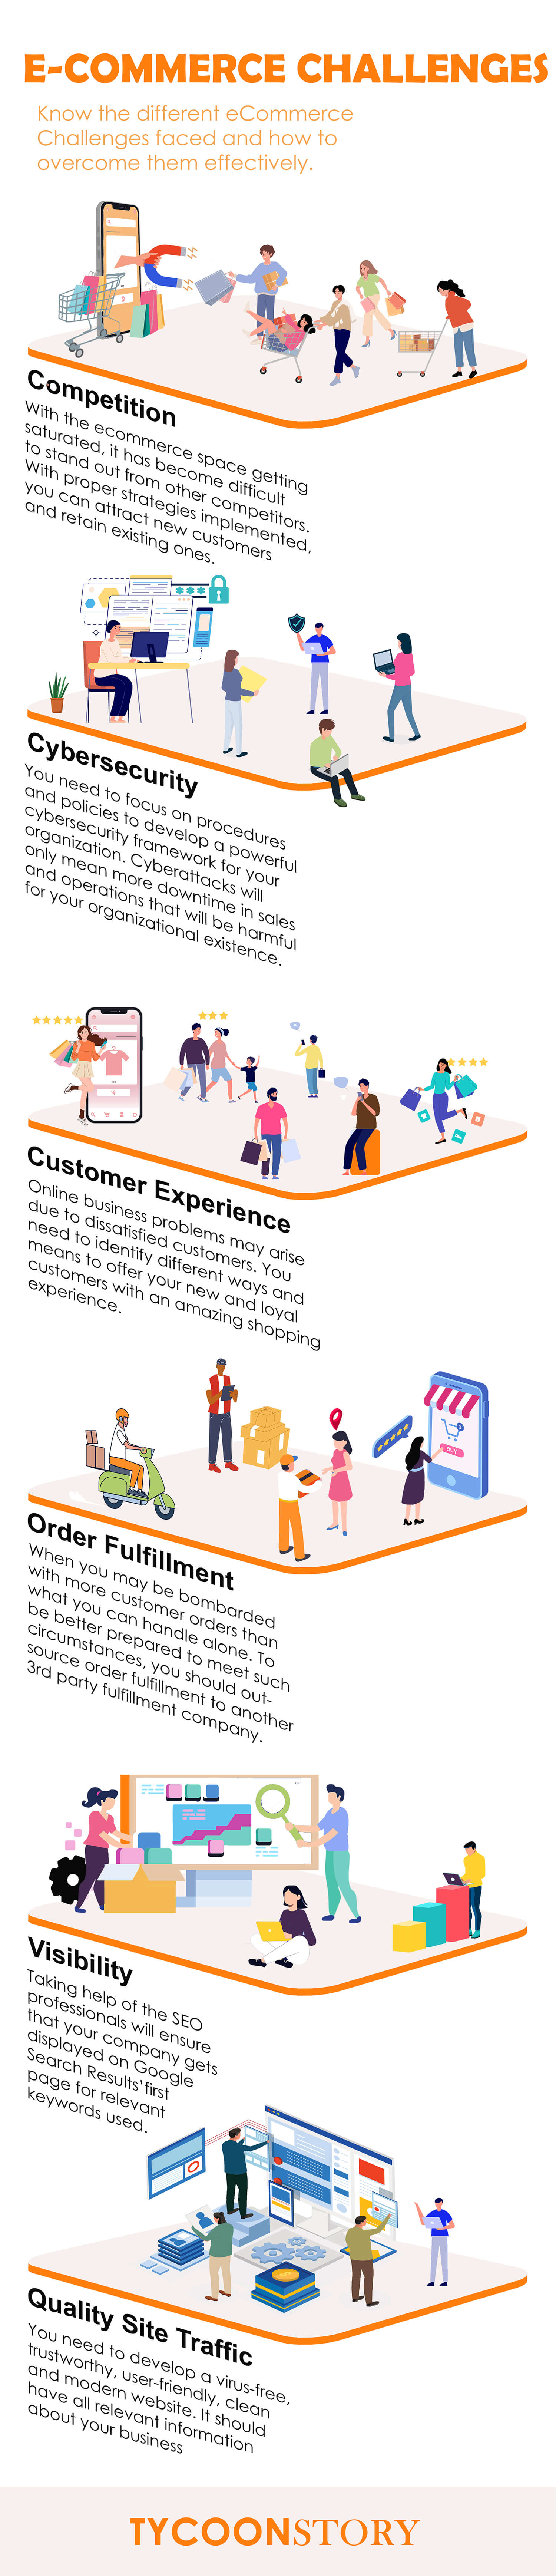 Top ecommerce challenges facing small businesses ecommerce challenges infographic